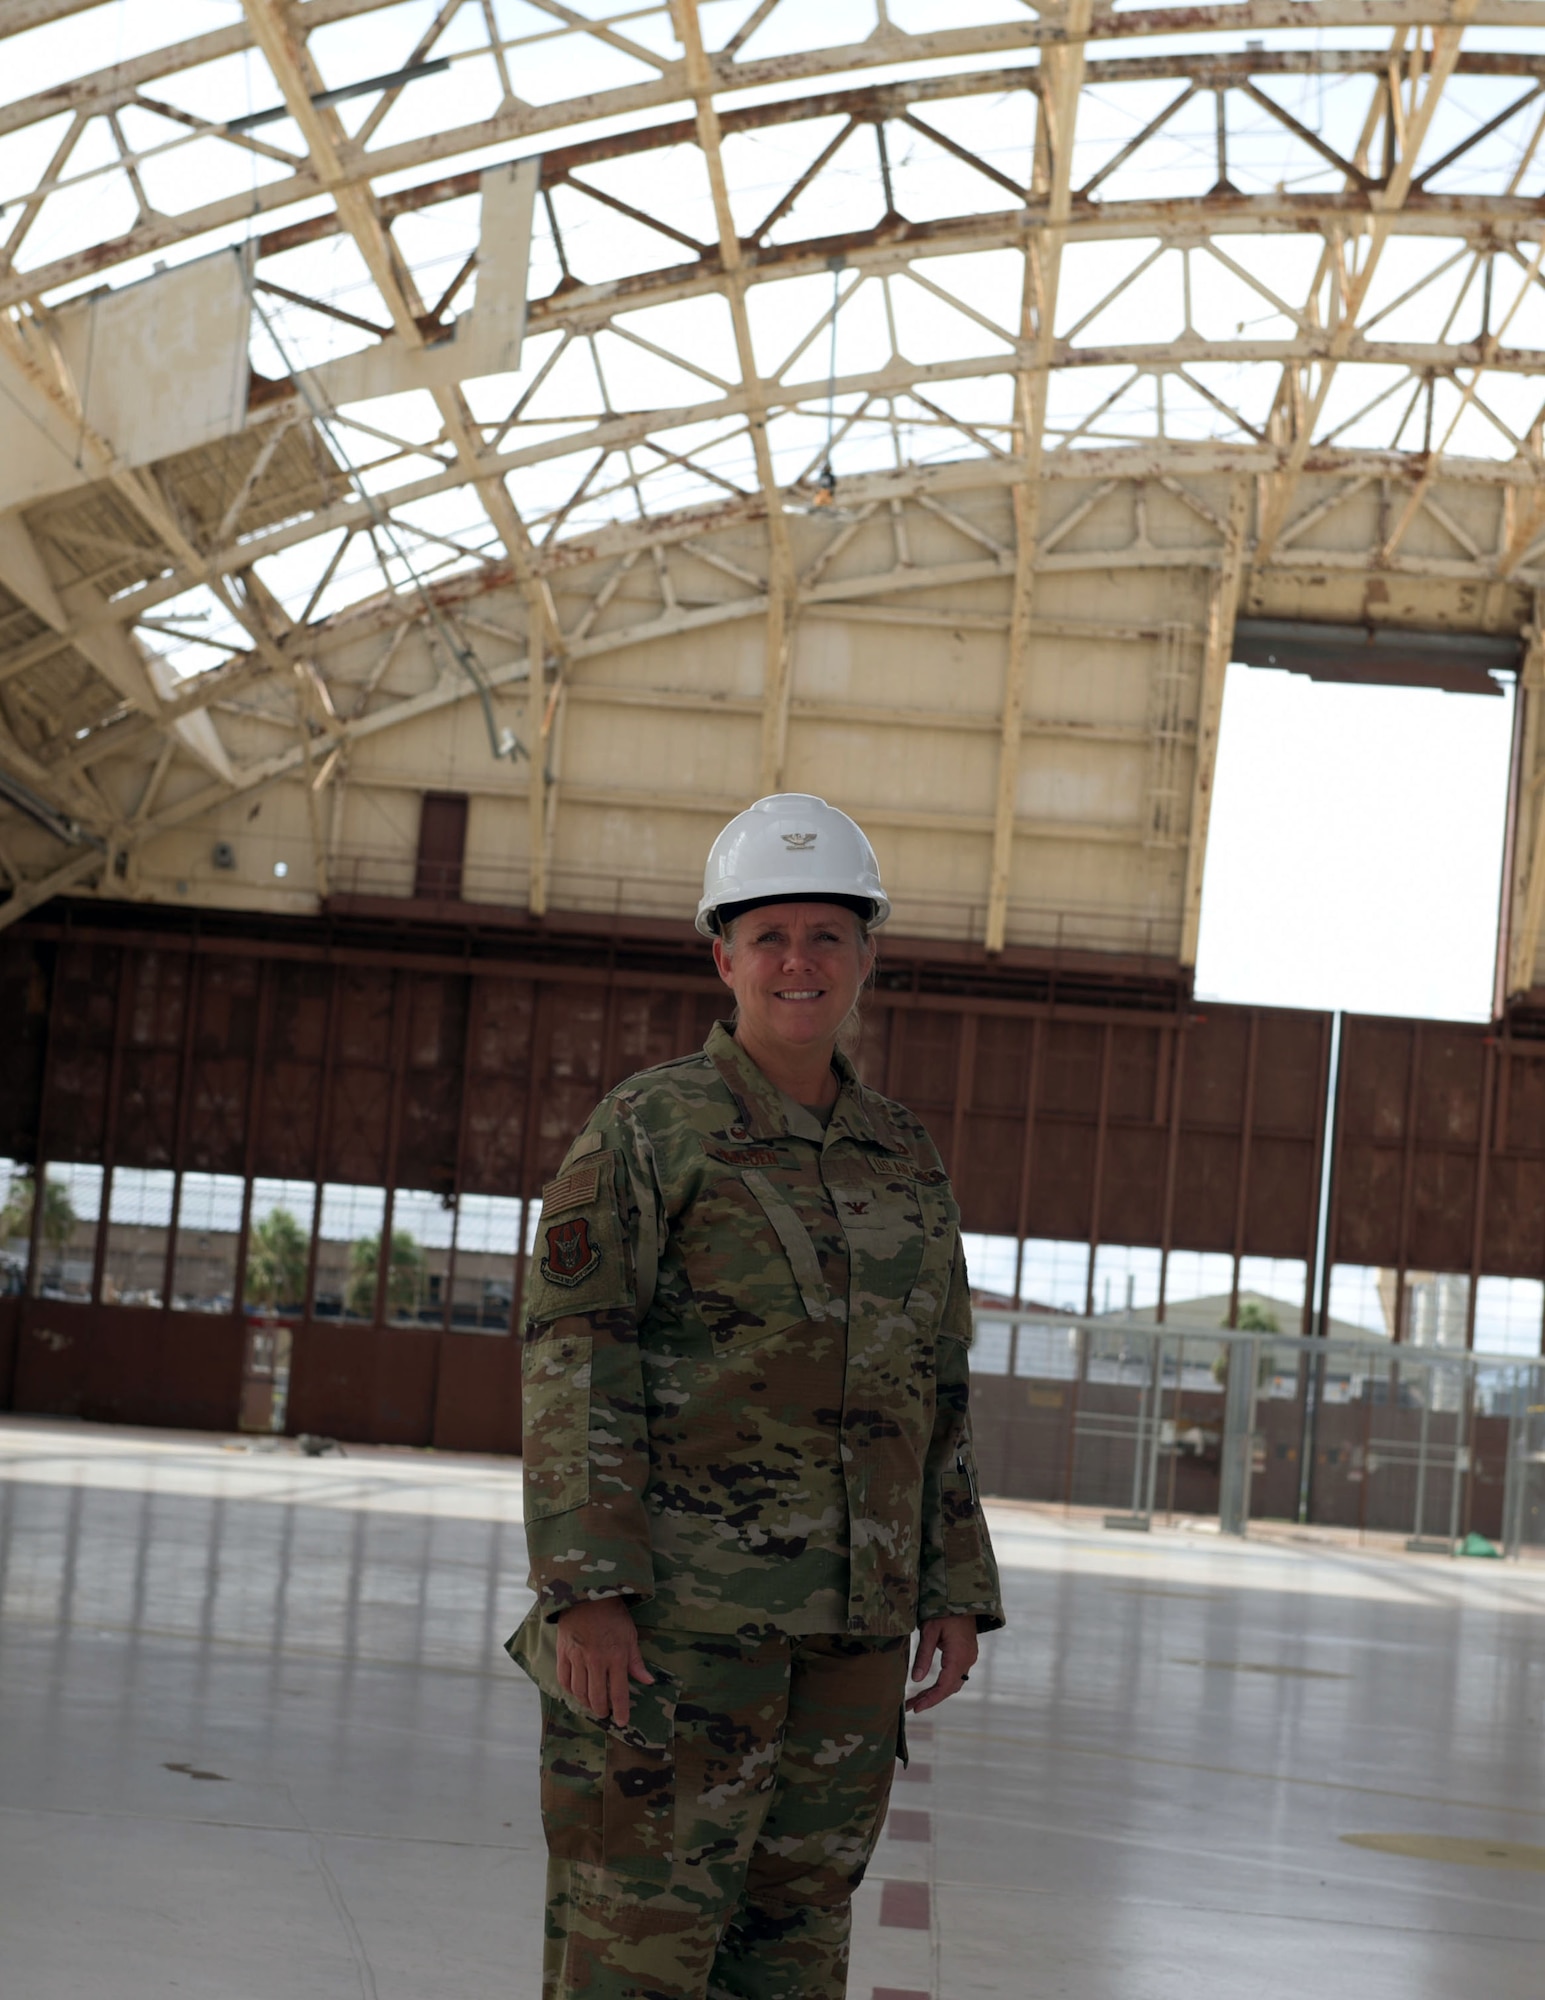 Col. Lori Walden, 325th Fighter Wing Tyndall Air Force Base Program Management Office director, poses for a photo Aug. 26, 2019, at Tyndall Air Force Base, Florida. Walden hepls the  PMO mission repair, reshape and rebuild, to support both short-term resumption of mission operations and long-term development. (U.S. Air Force photo by Senior Airman Dylan Auger)